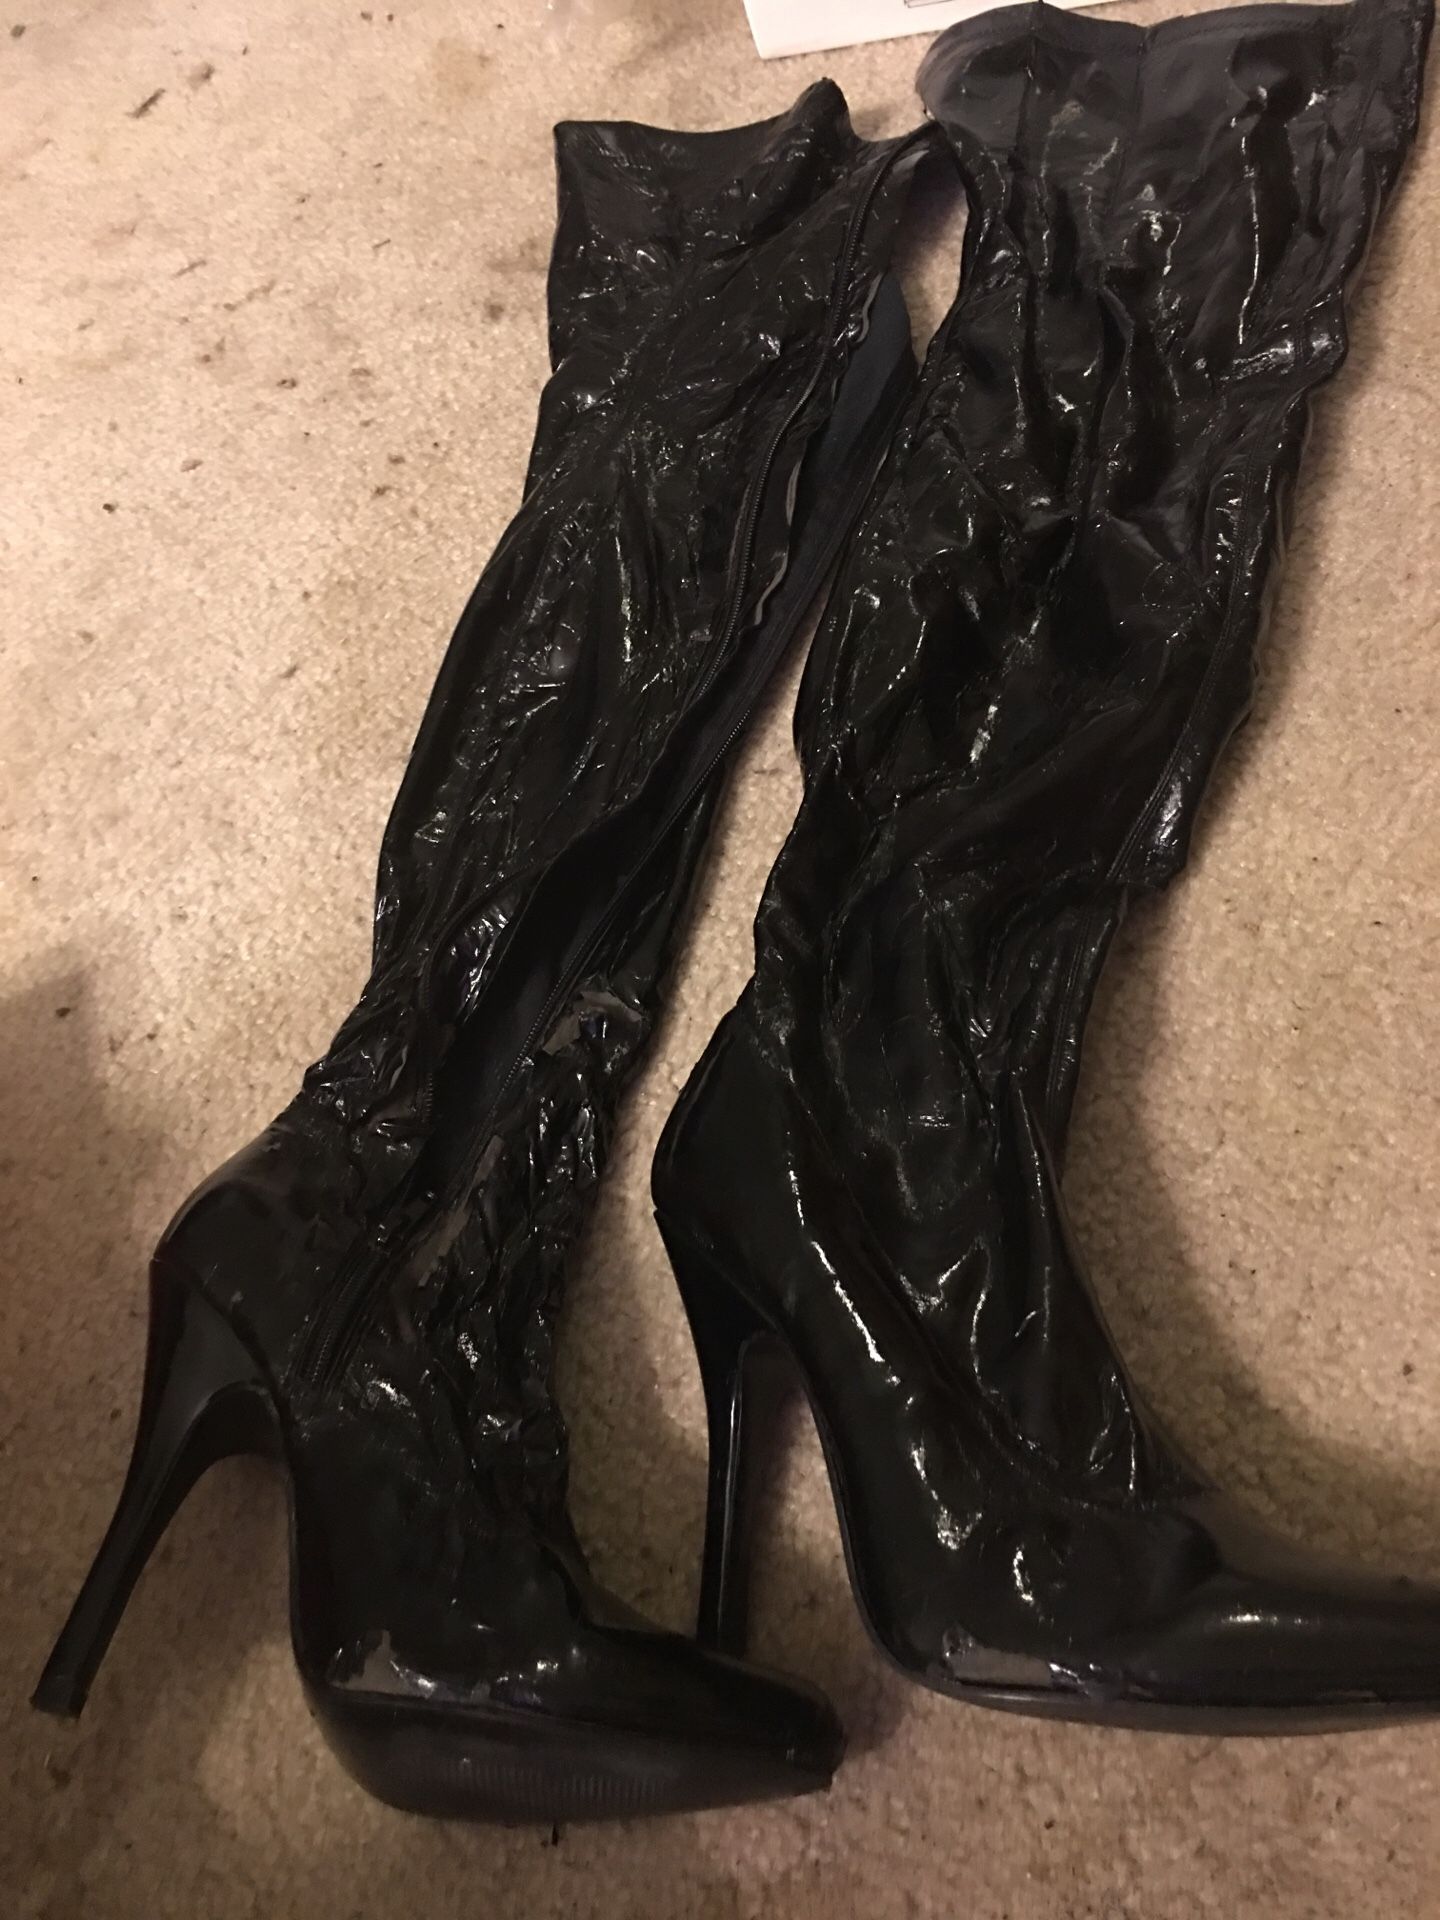 Sexy Vinyl Stiletto thigh high boots size 9 great for Halloween costumes!